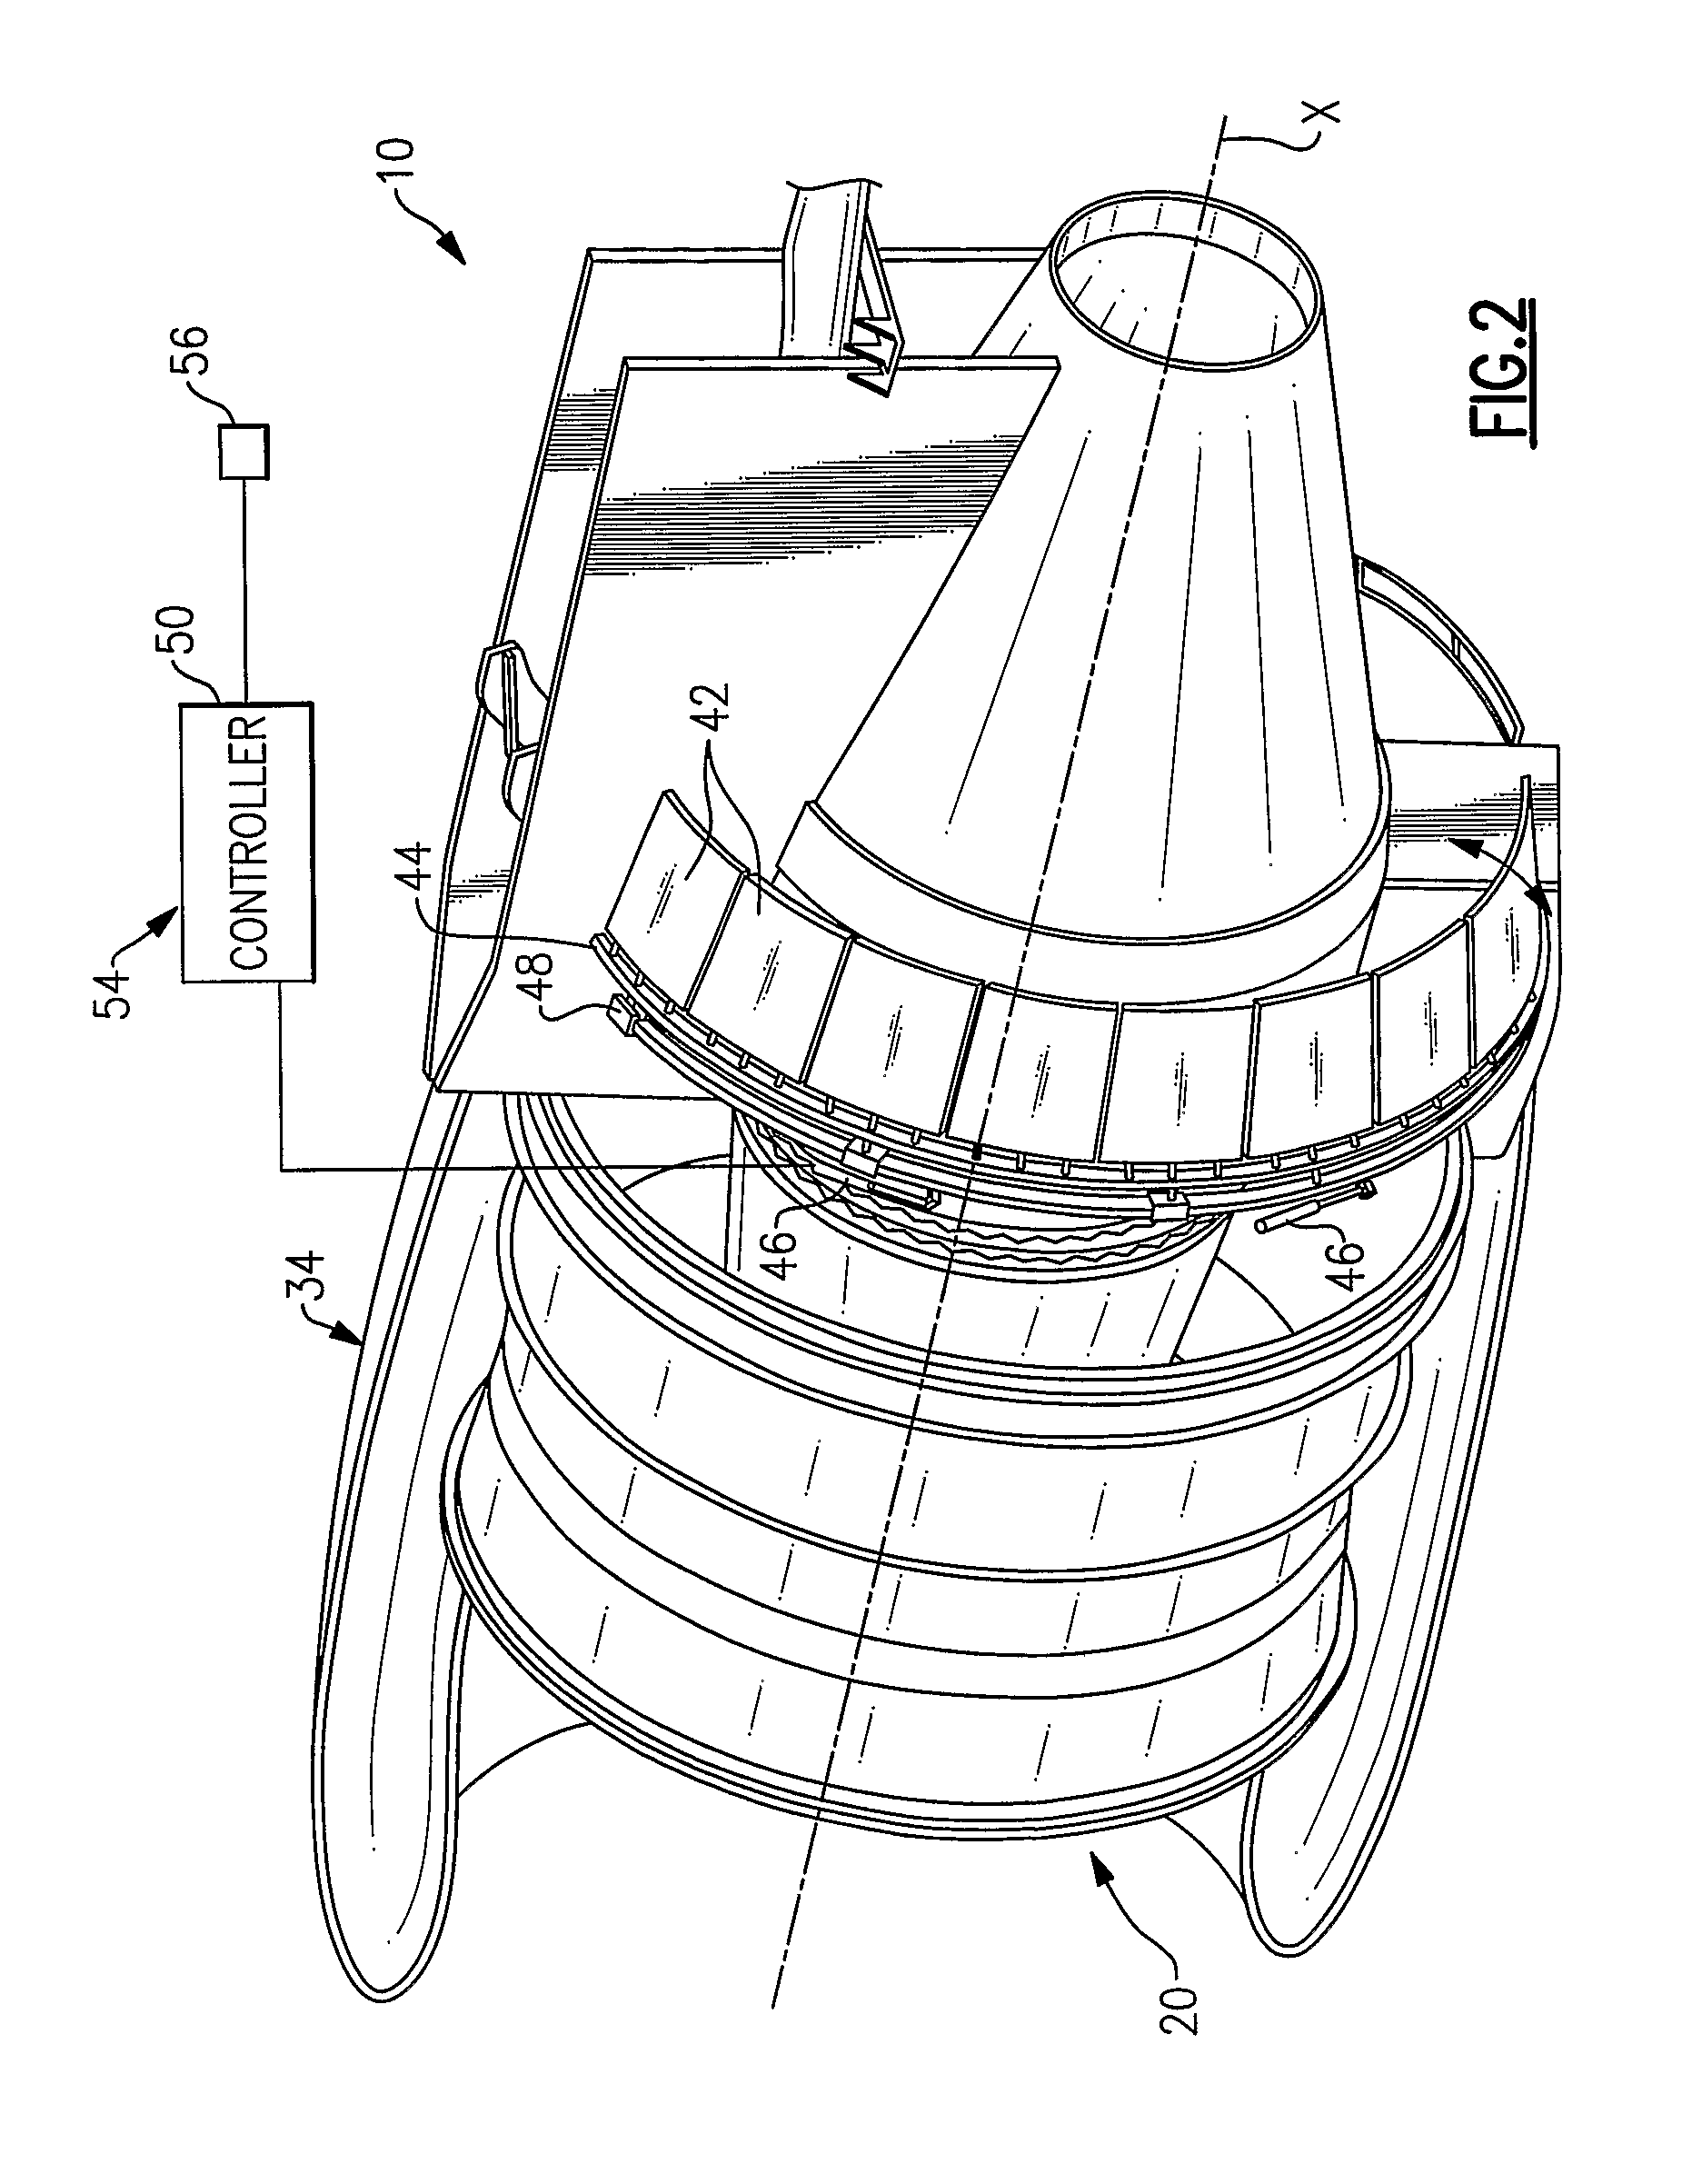 Variable area nozzle assisted noise control of a gas turbine engine